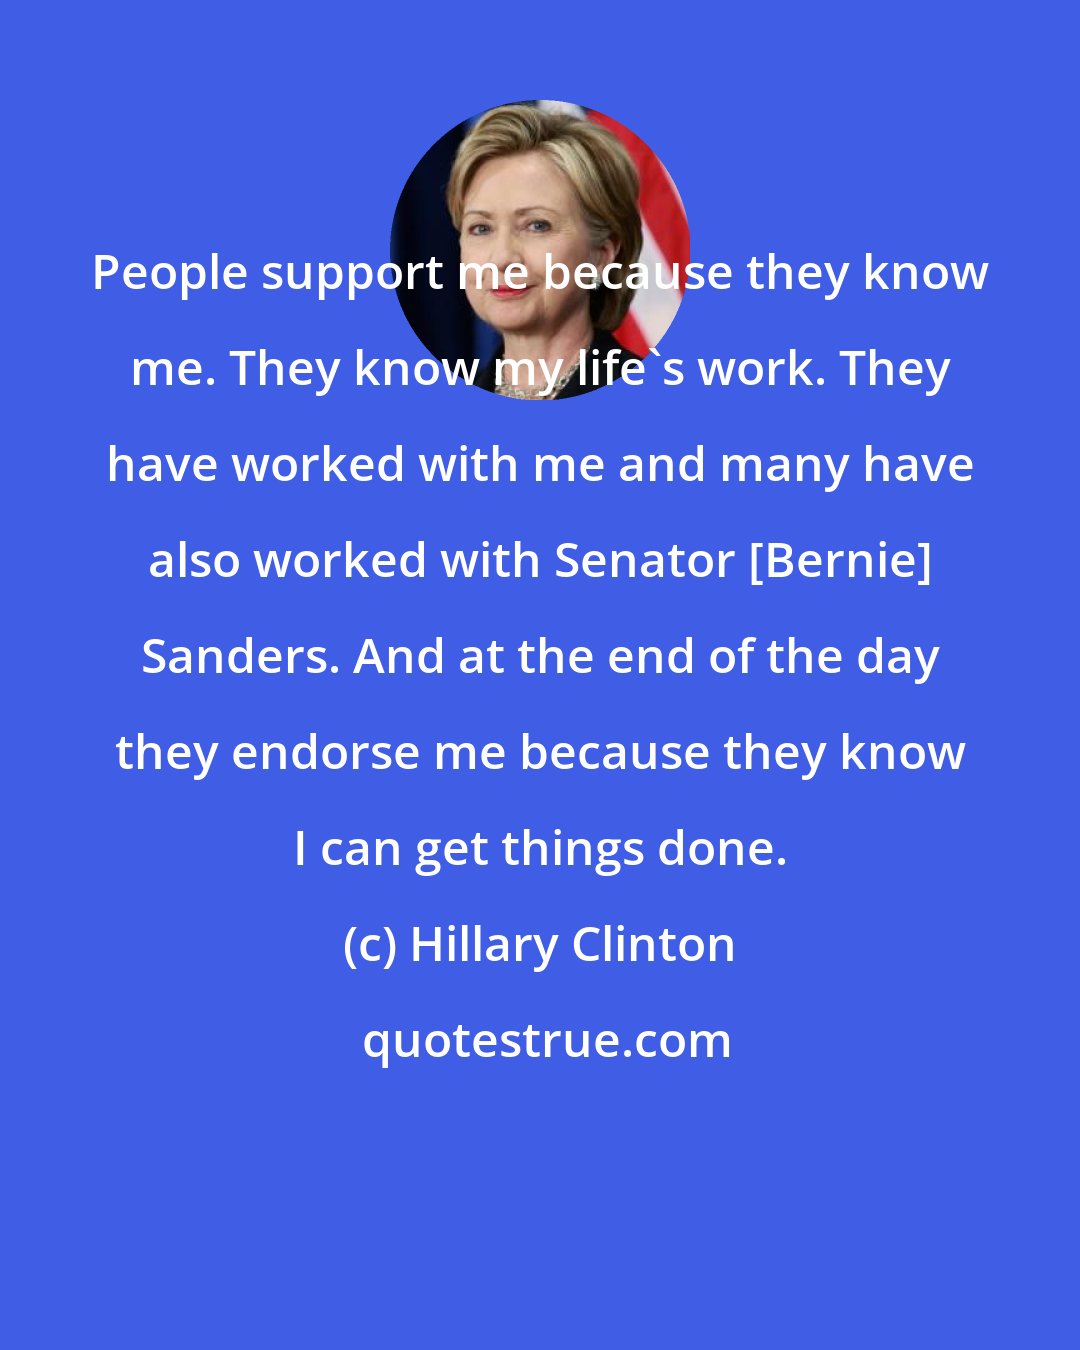 Hillary Clinton: People support me because they know me. They know my life's work. They have worked with me and many have also worked with Senator [Bernie] Sanders. And at the end of the day they endorse me because they know I can get things done.